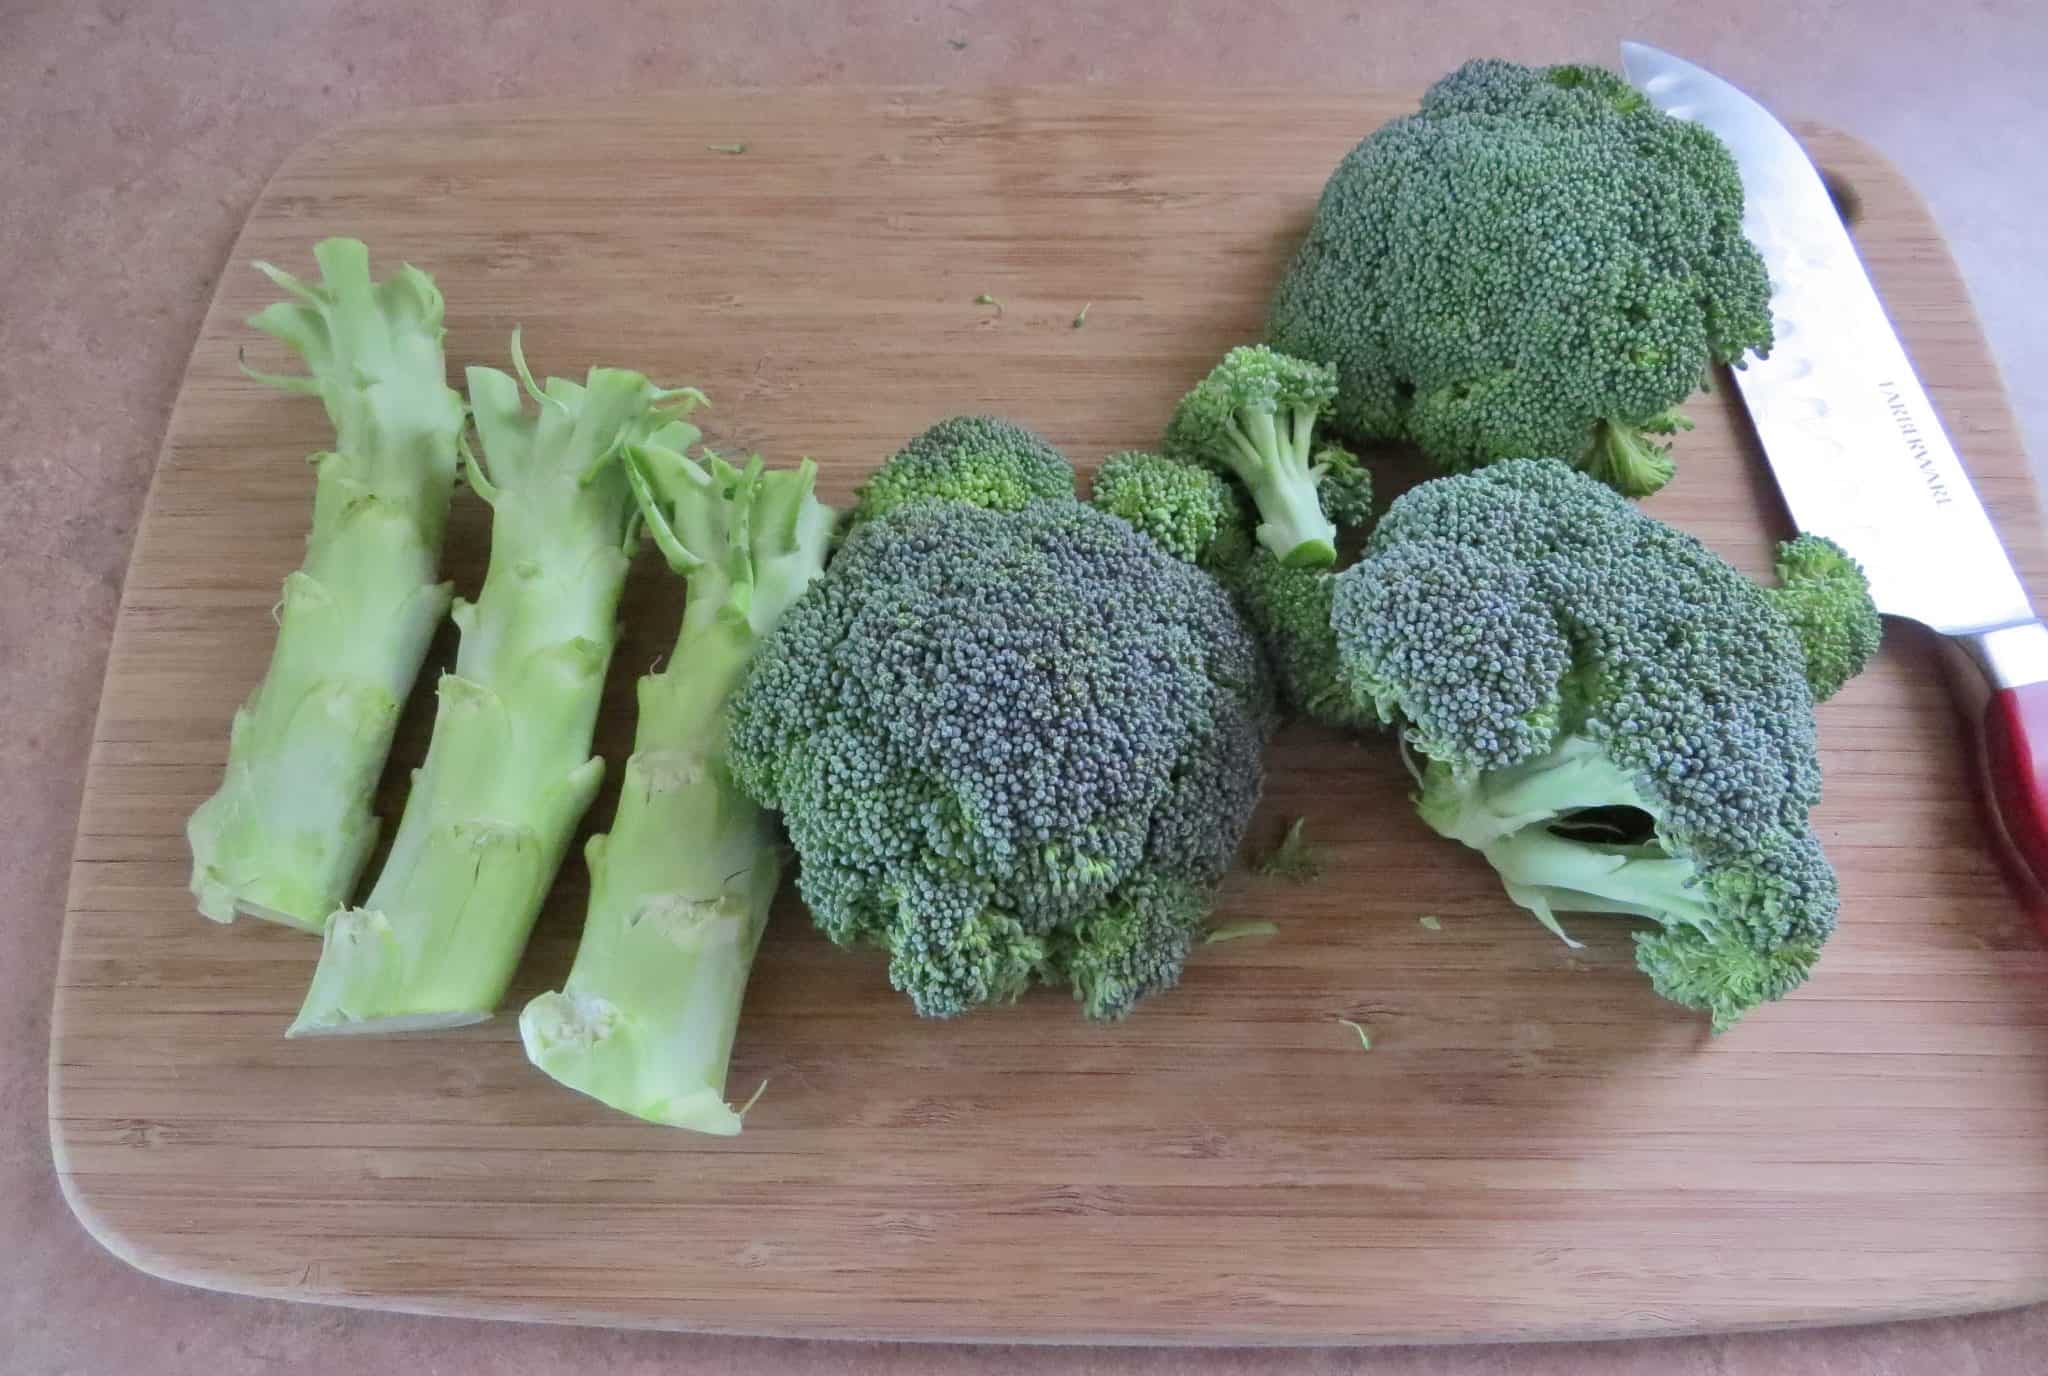 how to chop broccoli, remove florets from the stem, displayed on a wooden cutting board with a chef's knife.